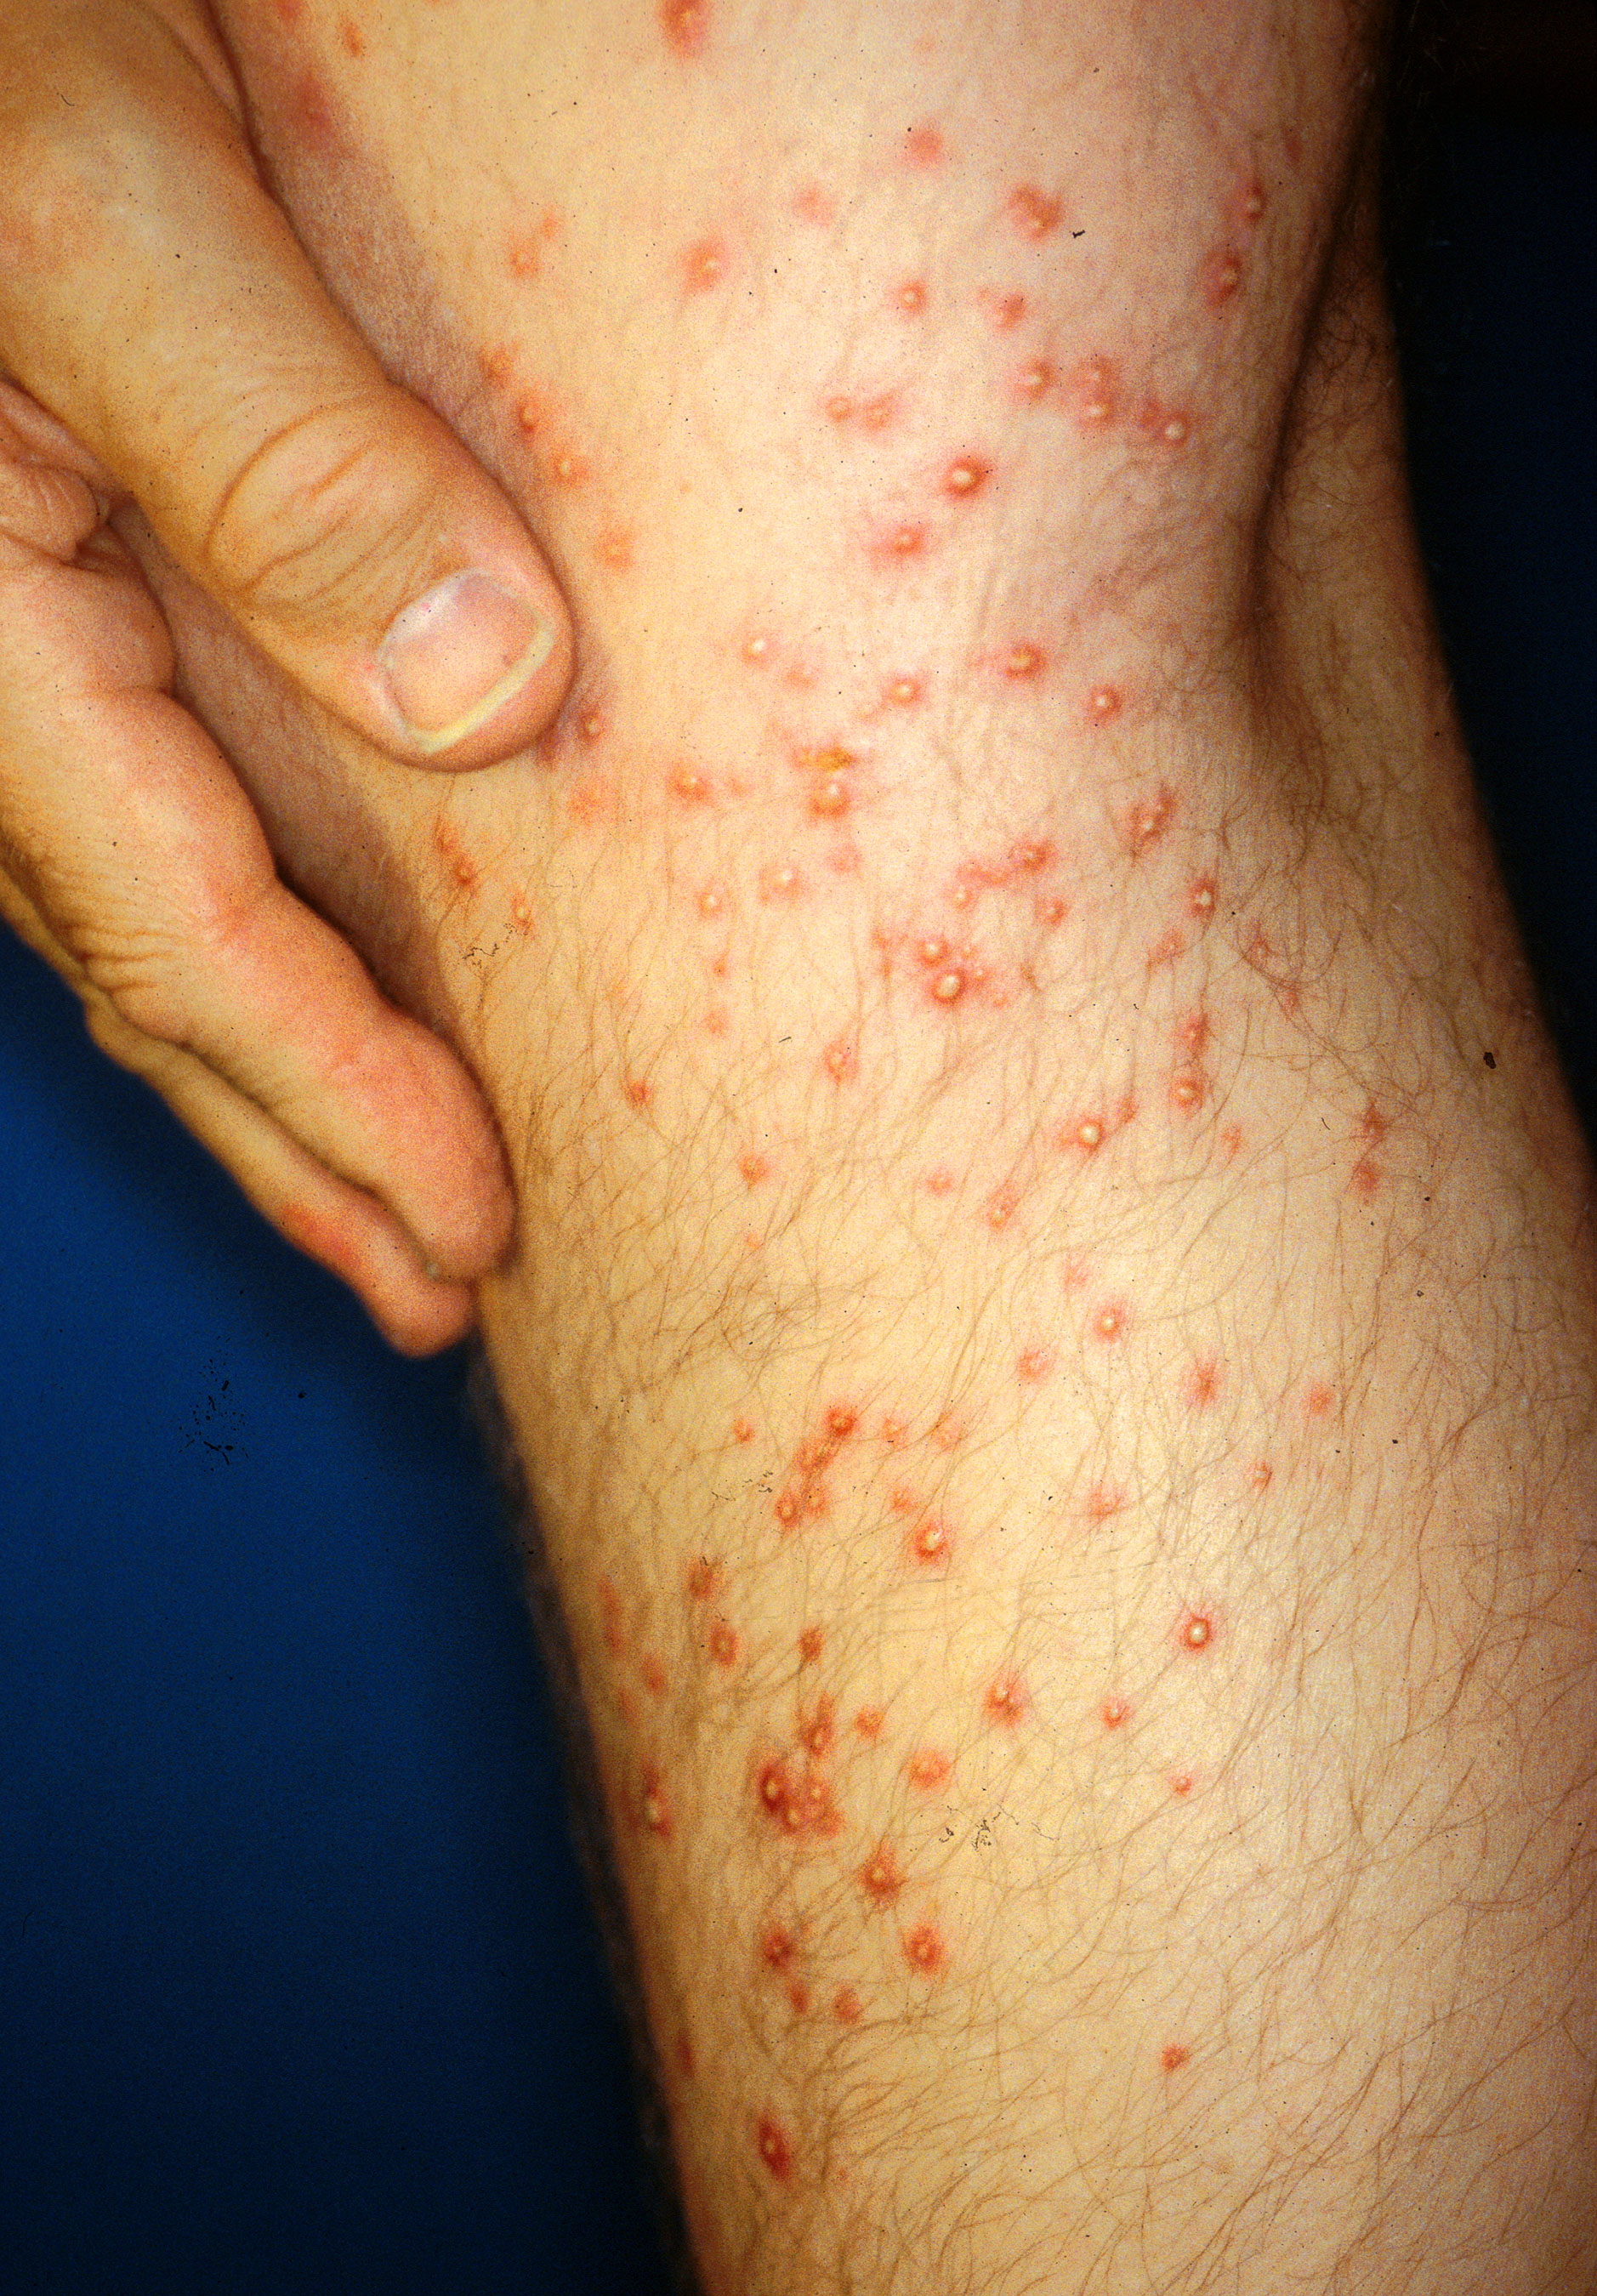 In less than 10 seconds, an unwary scientist was stung more than 250 times on one leg when he carelessly knelt on a collapsed fire ant mound. The sterile pustules developed to this stage in three days. Image and cutline courtesy of USDA National Agricultural Library Image Galleries. Photo by Daniel Wojcik. 